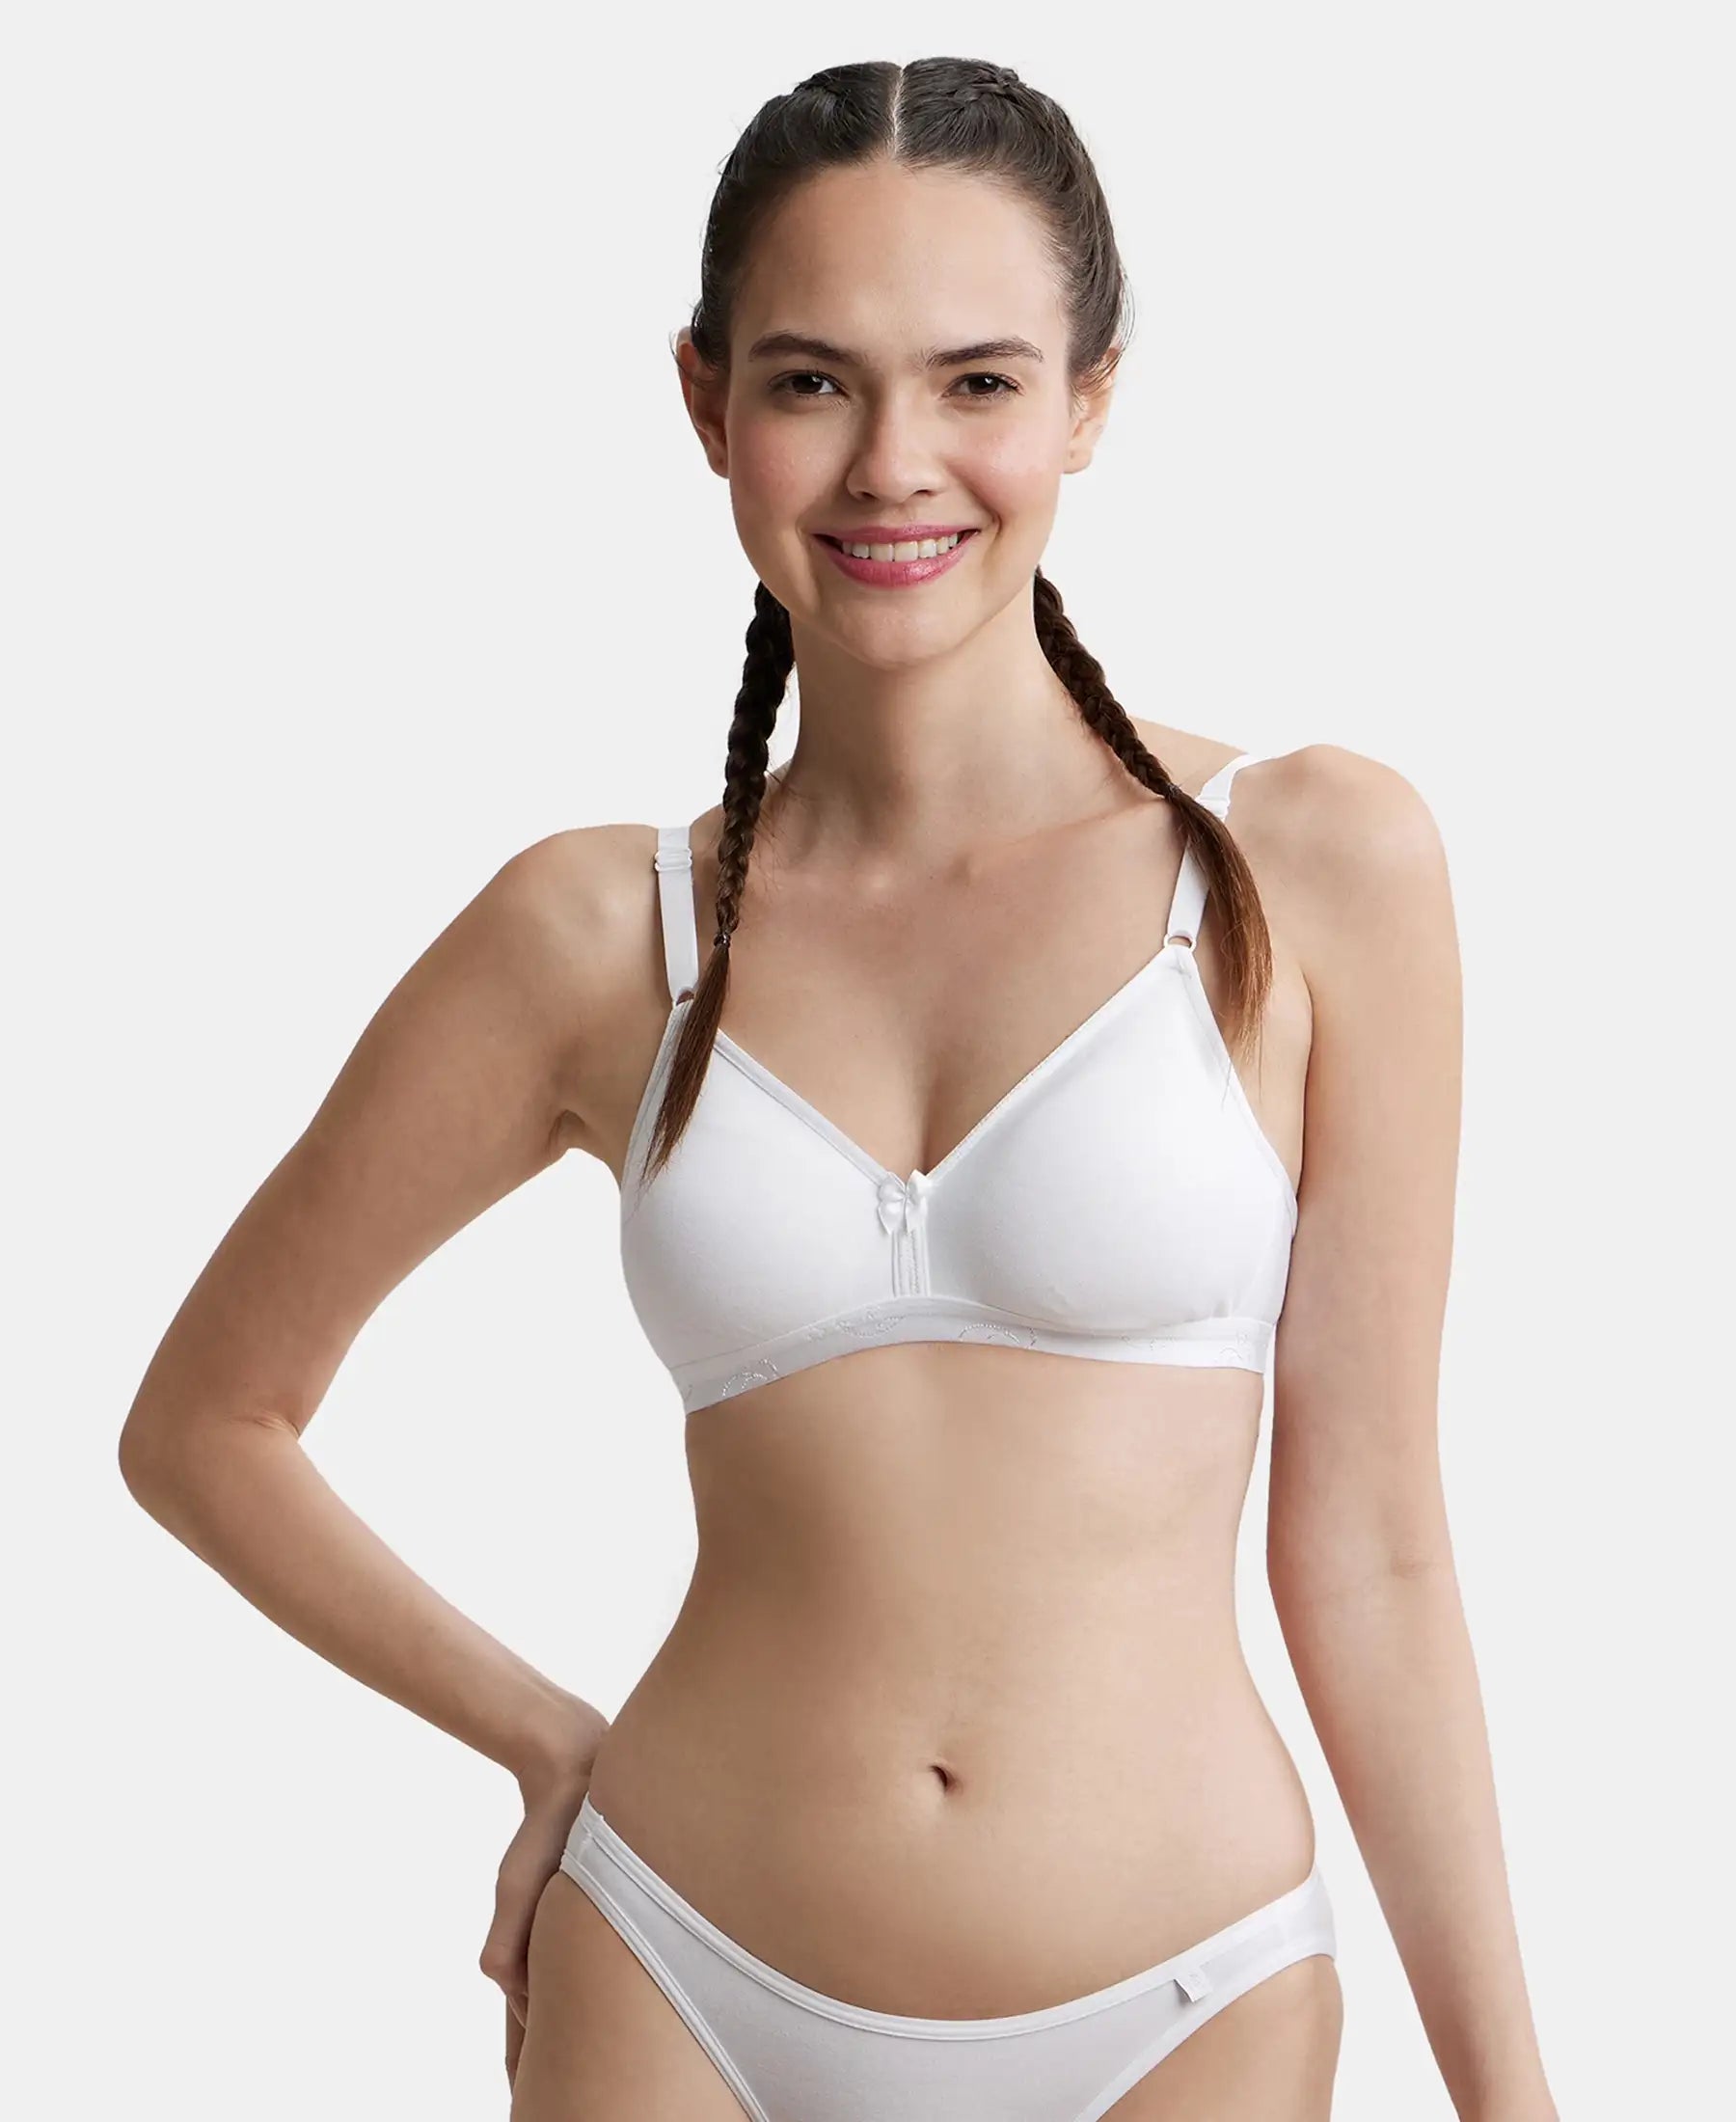 Quinny Yoga Clothing - Alo Interlace Sport Bra Merk Alo Model Interlace Bra  Coulour White Size XS Price IDR 700.000 Brand New Ready Stock Limited Stock  Grab it before its gone Happy